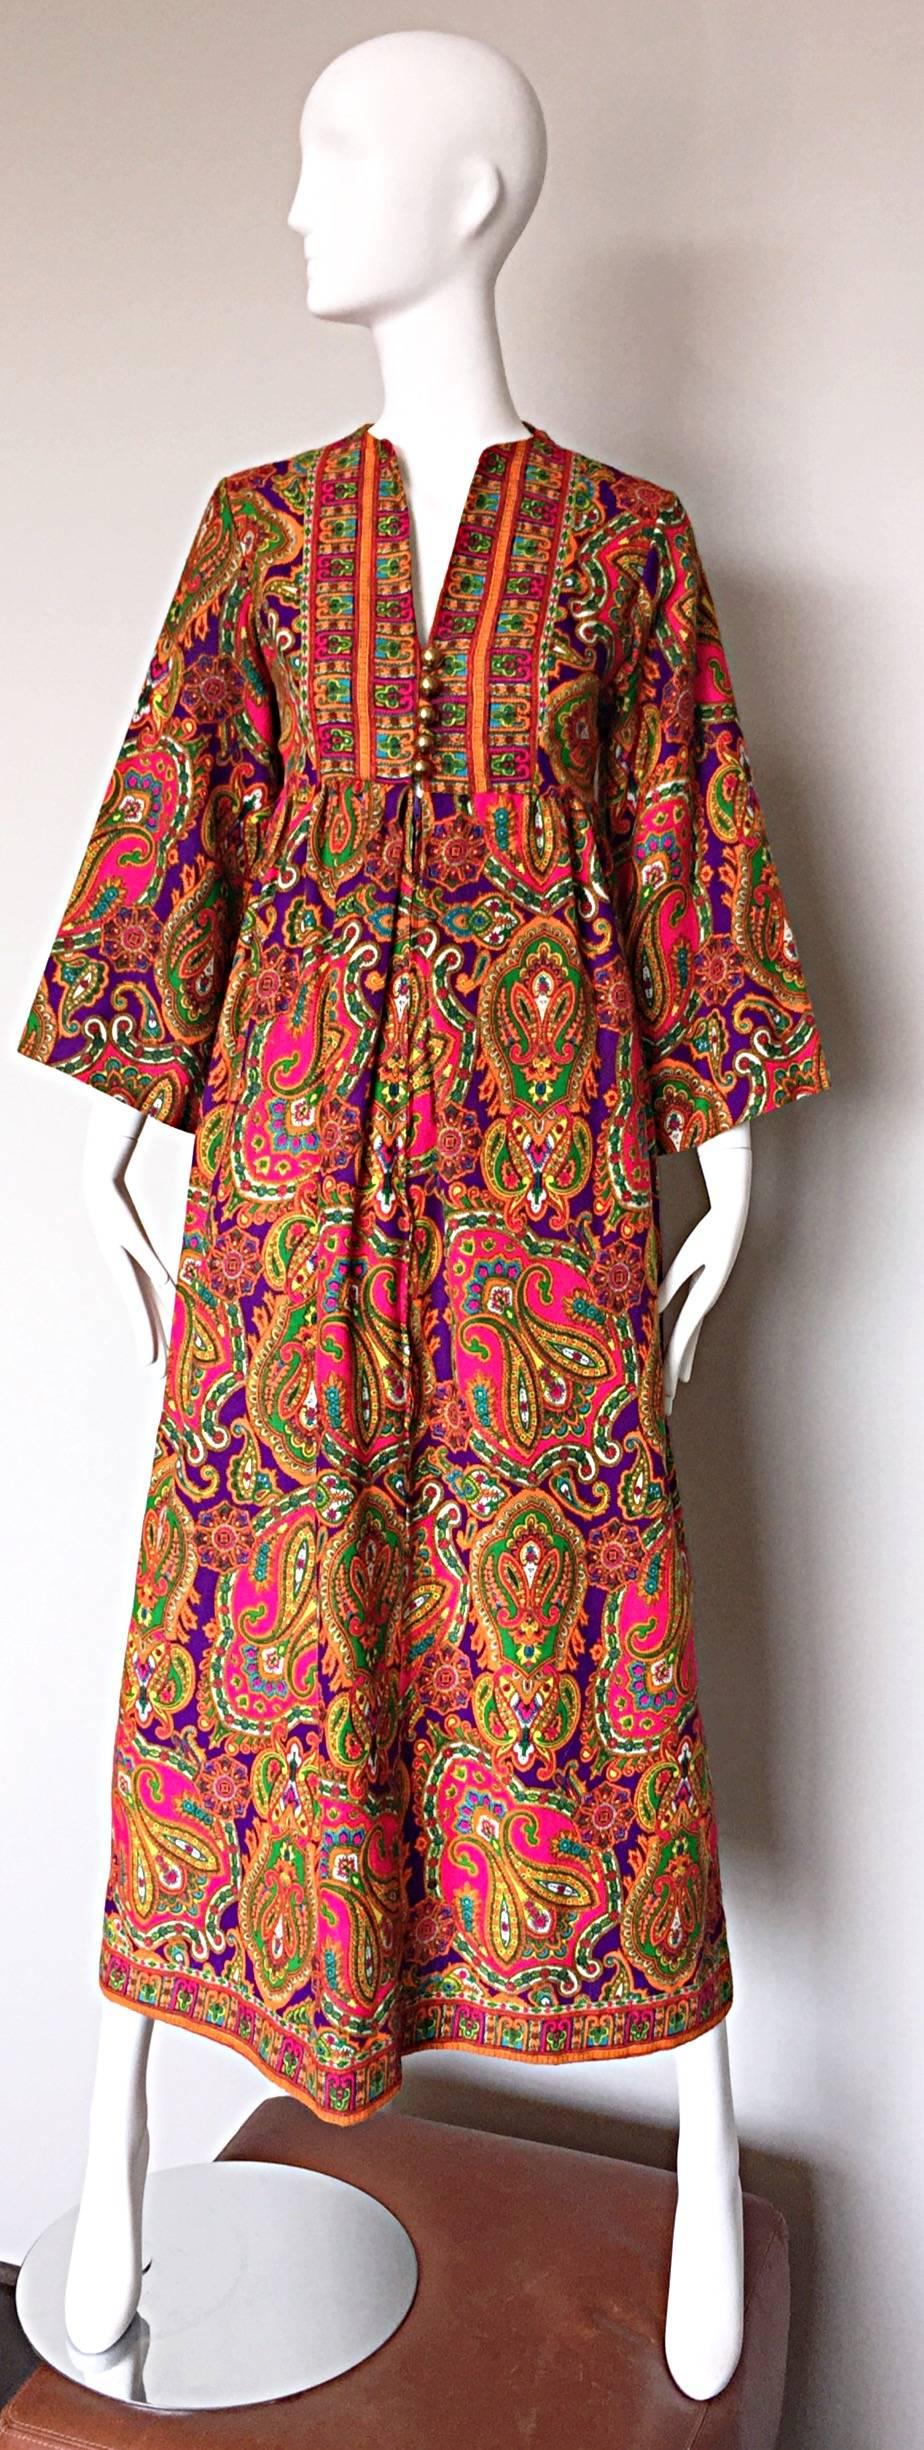 Wonderful vintage 1970s JOSEPH MAGNIN colorful paisley kaftan / maxi dress! Features an allover regal paisley print in pink, purple, green, orange, blue and gold throughout. V-neckline with golden ball buttons up the bodice, with a hidden zipper